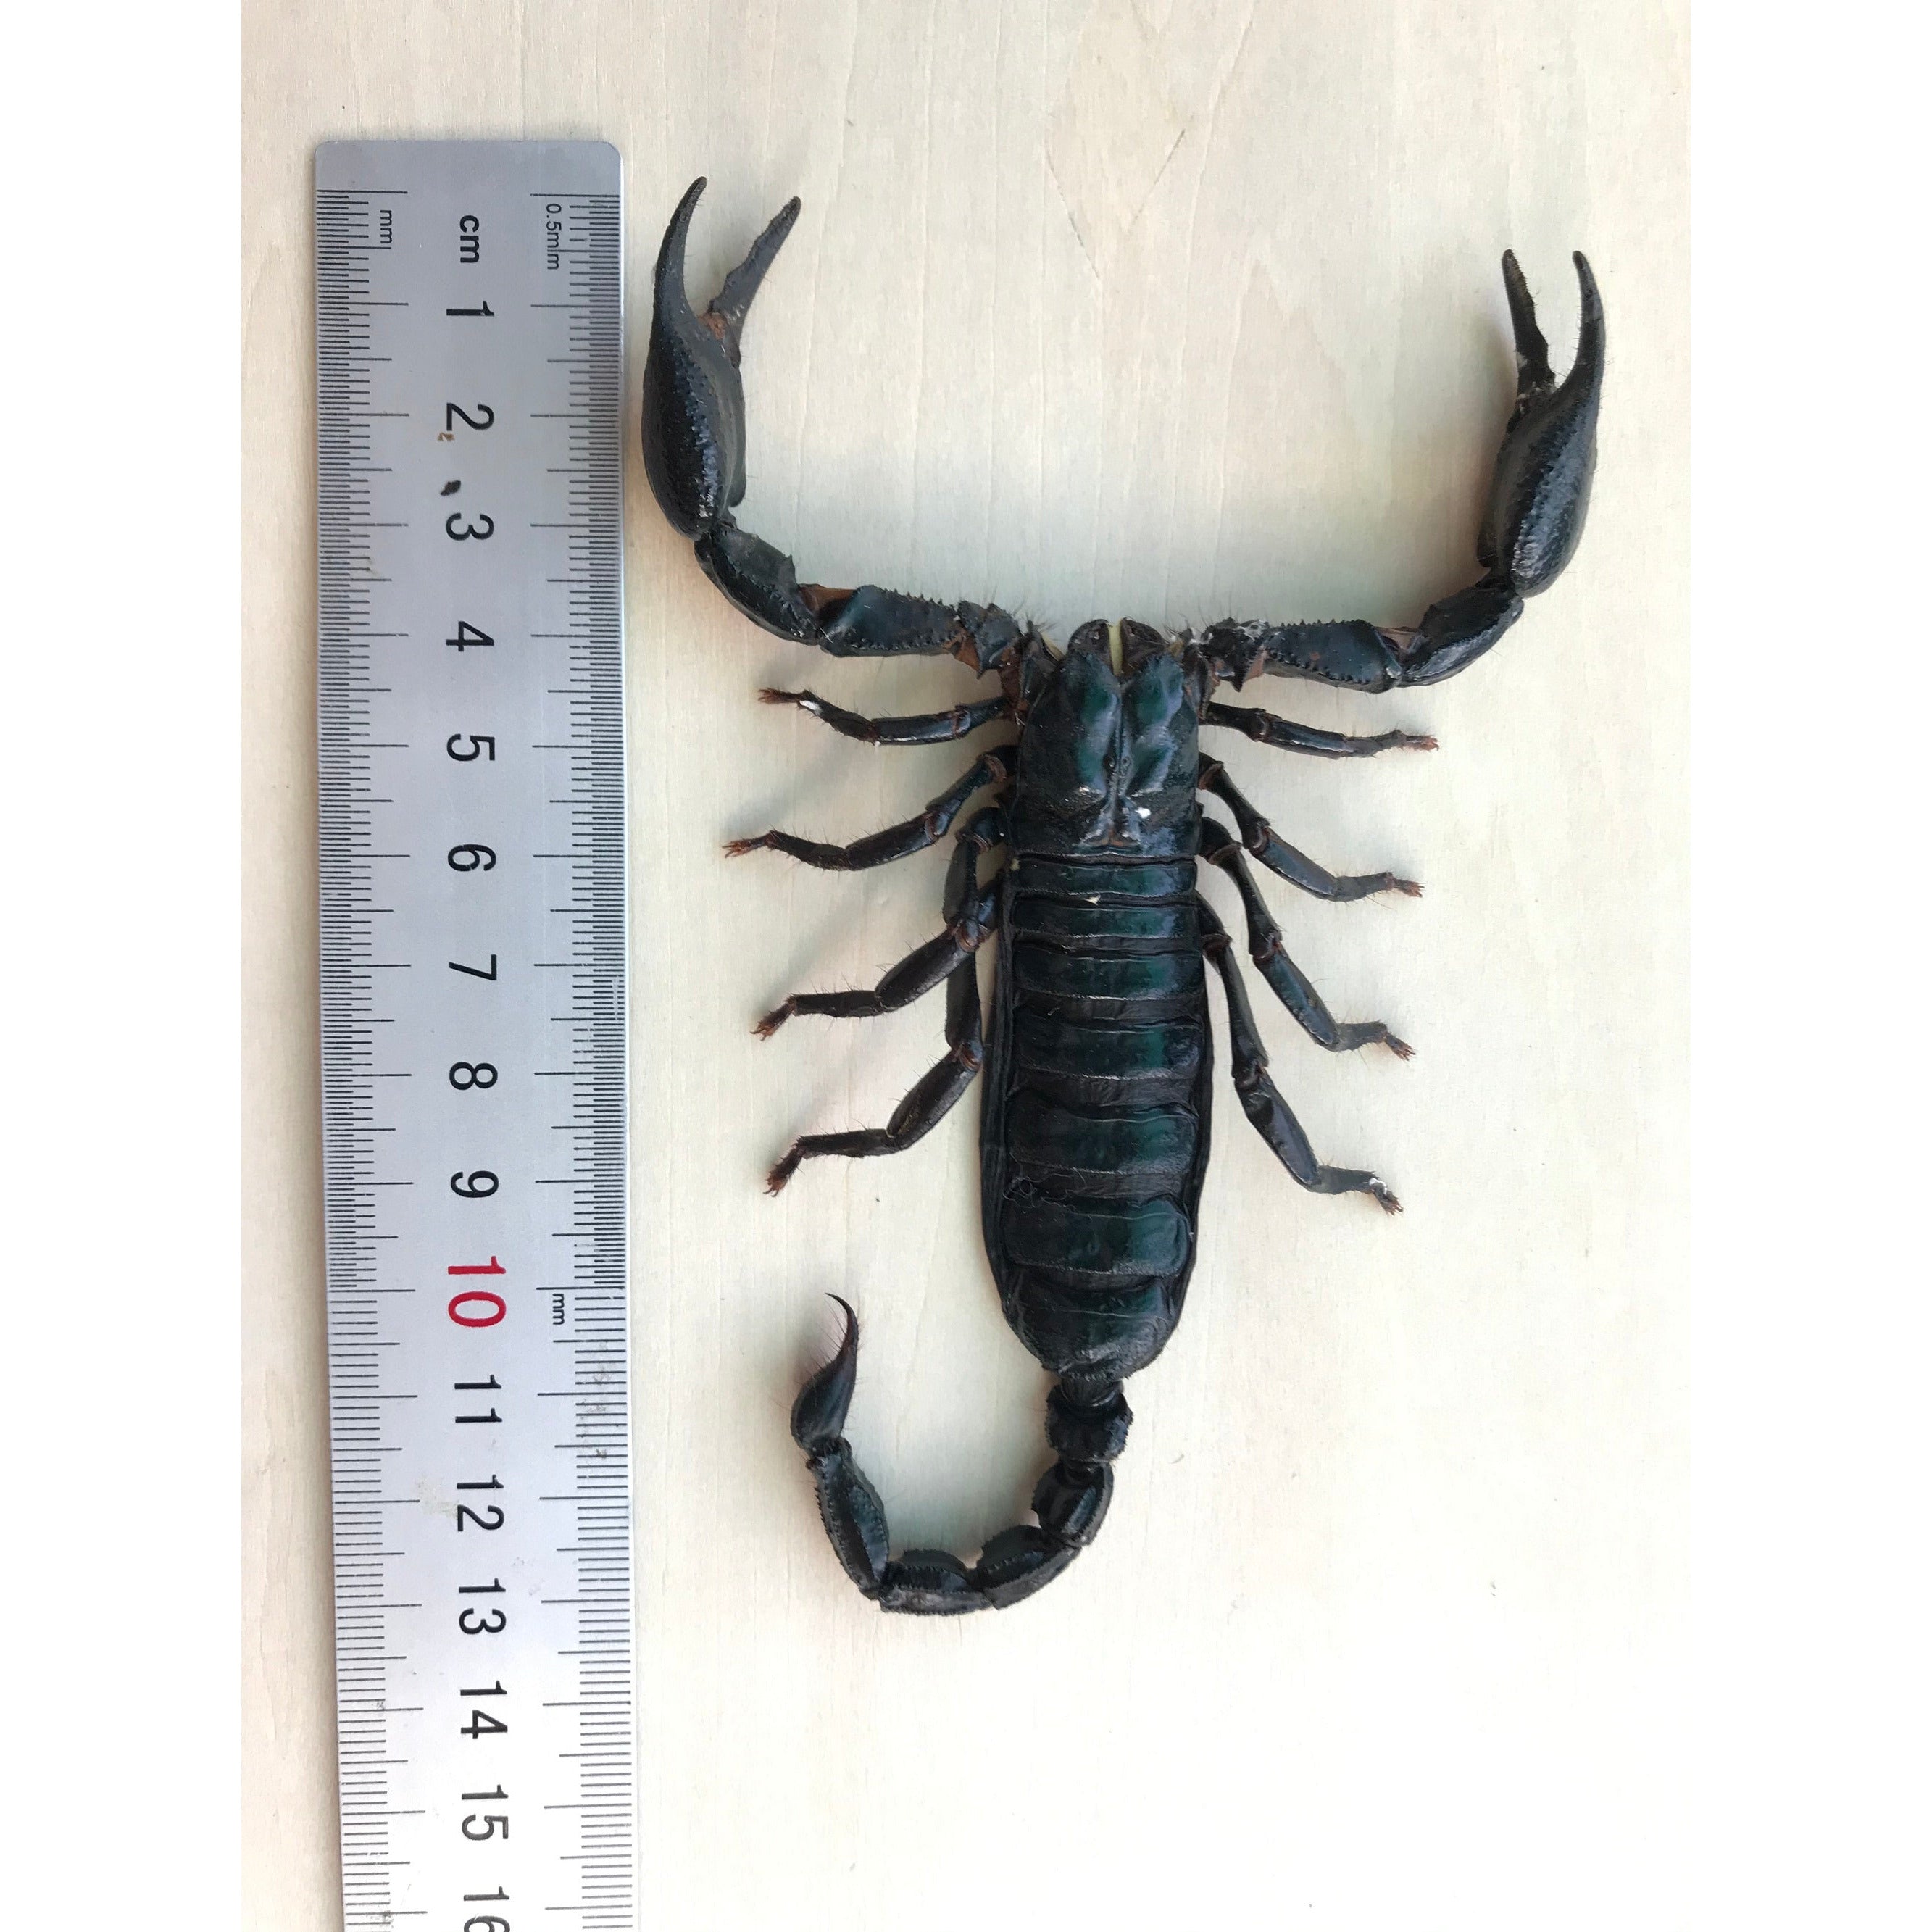 Pack of 6 Real Giant Scorpion 7” Large Beetle Insect Bug Entomology Taxidermy Oddity Taxadermy - Vinacreations